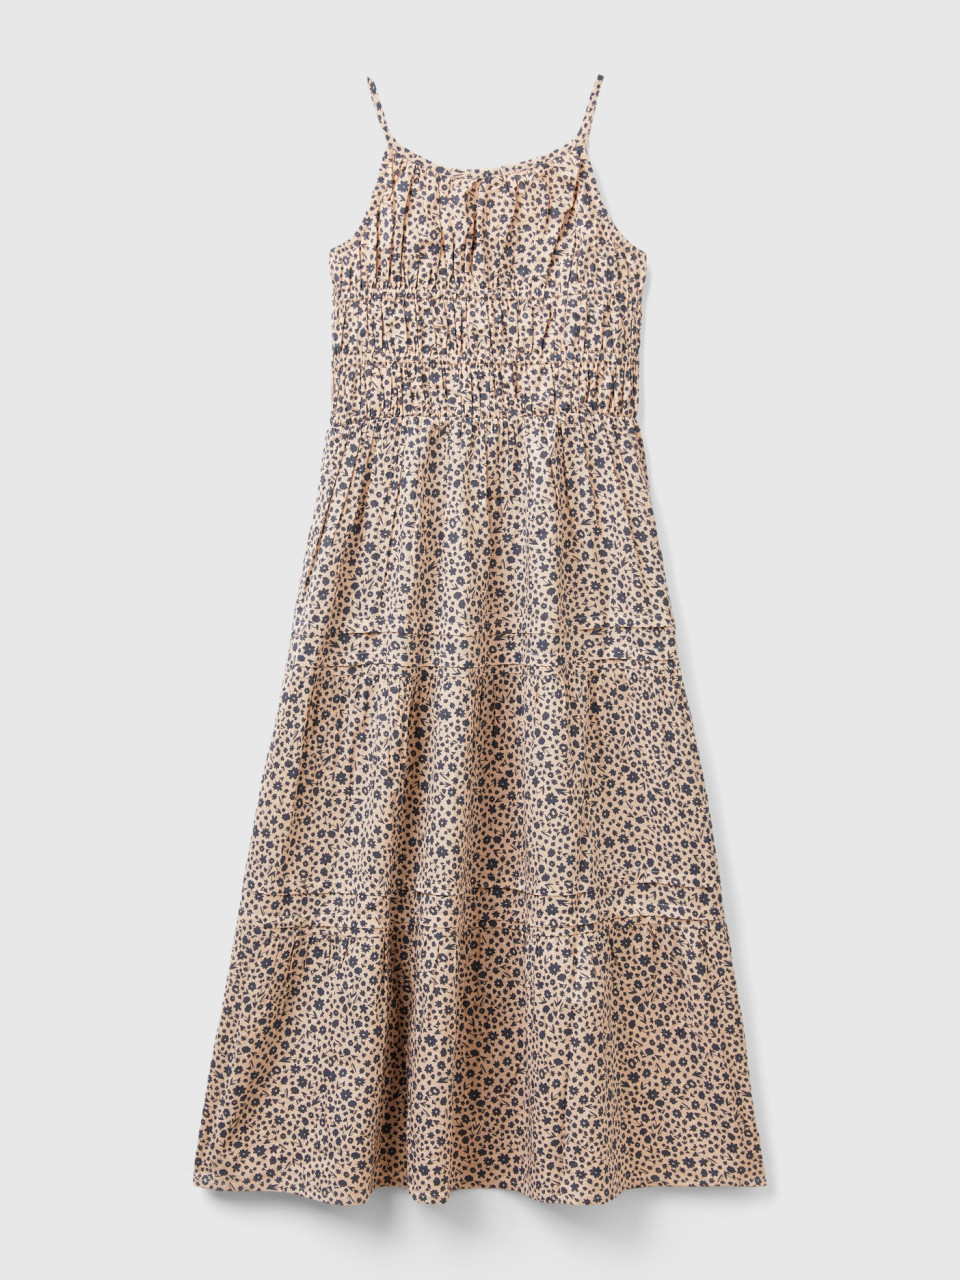 Benetton, Dress With Floral Print, Soft Pink, Kids